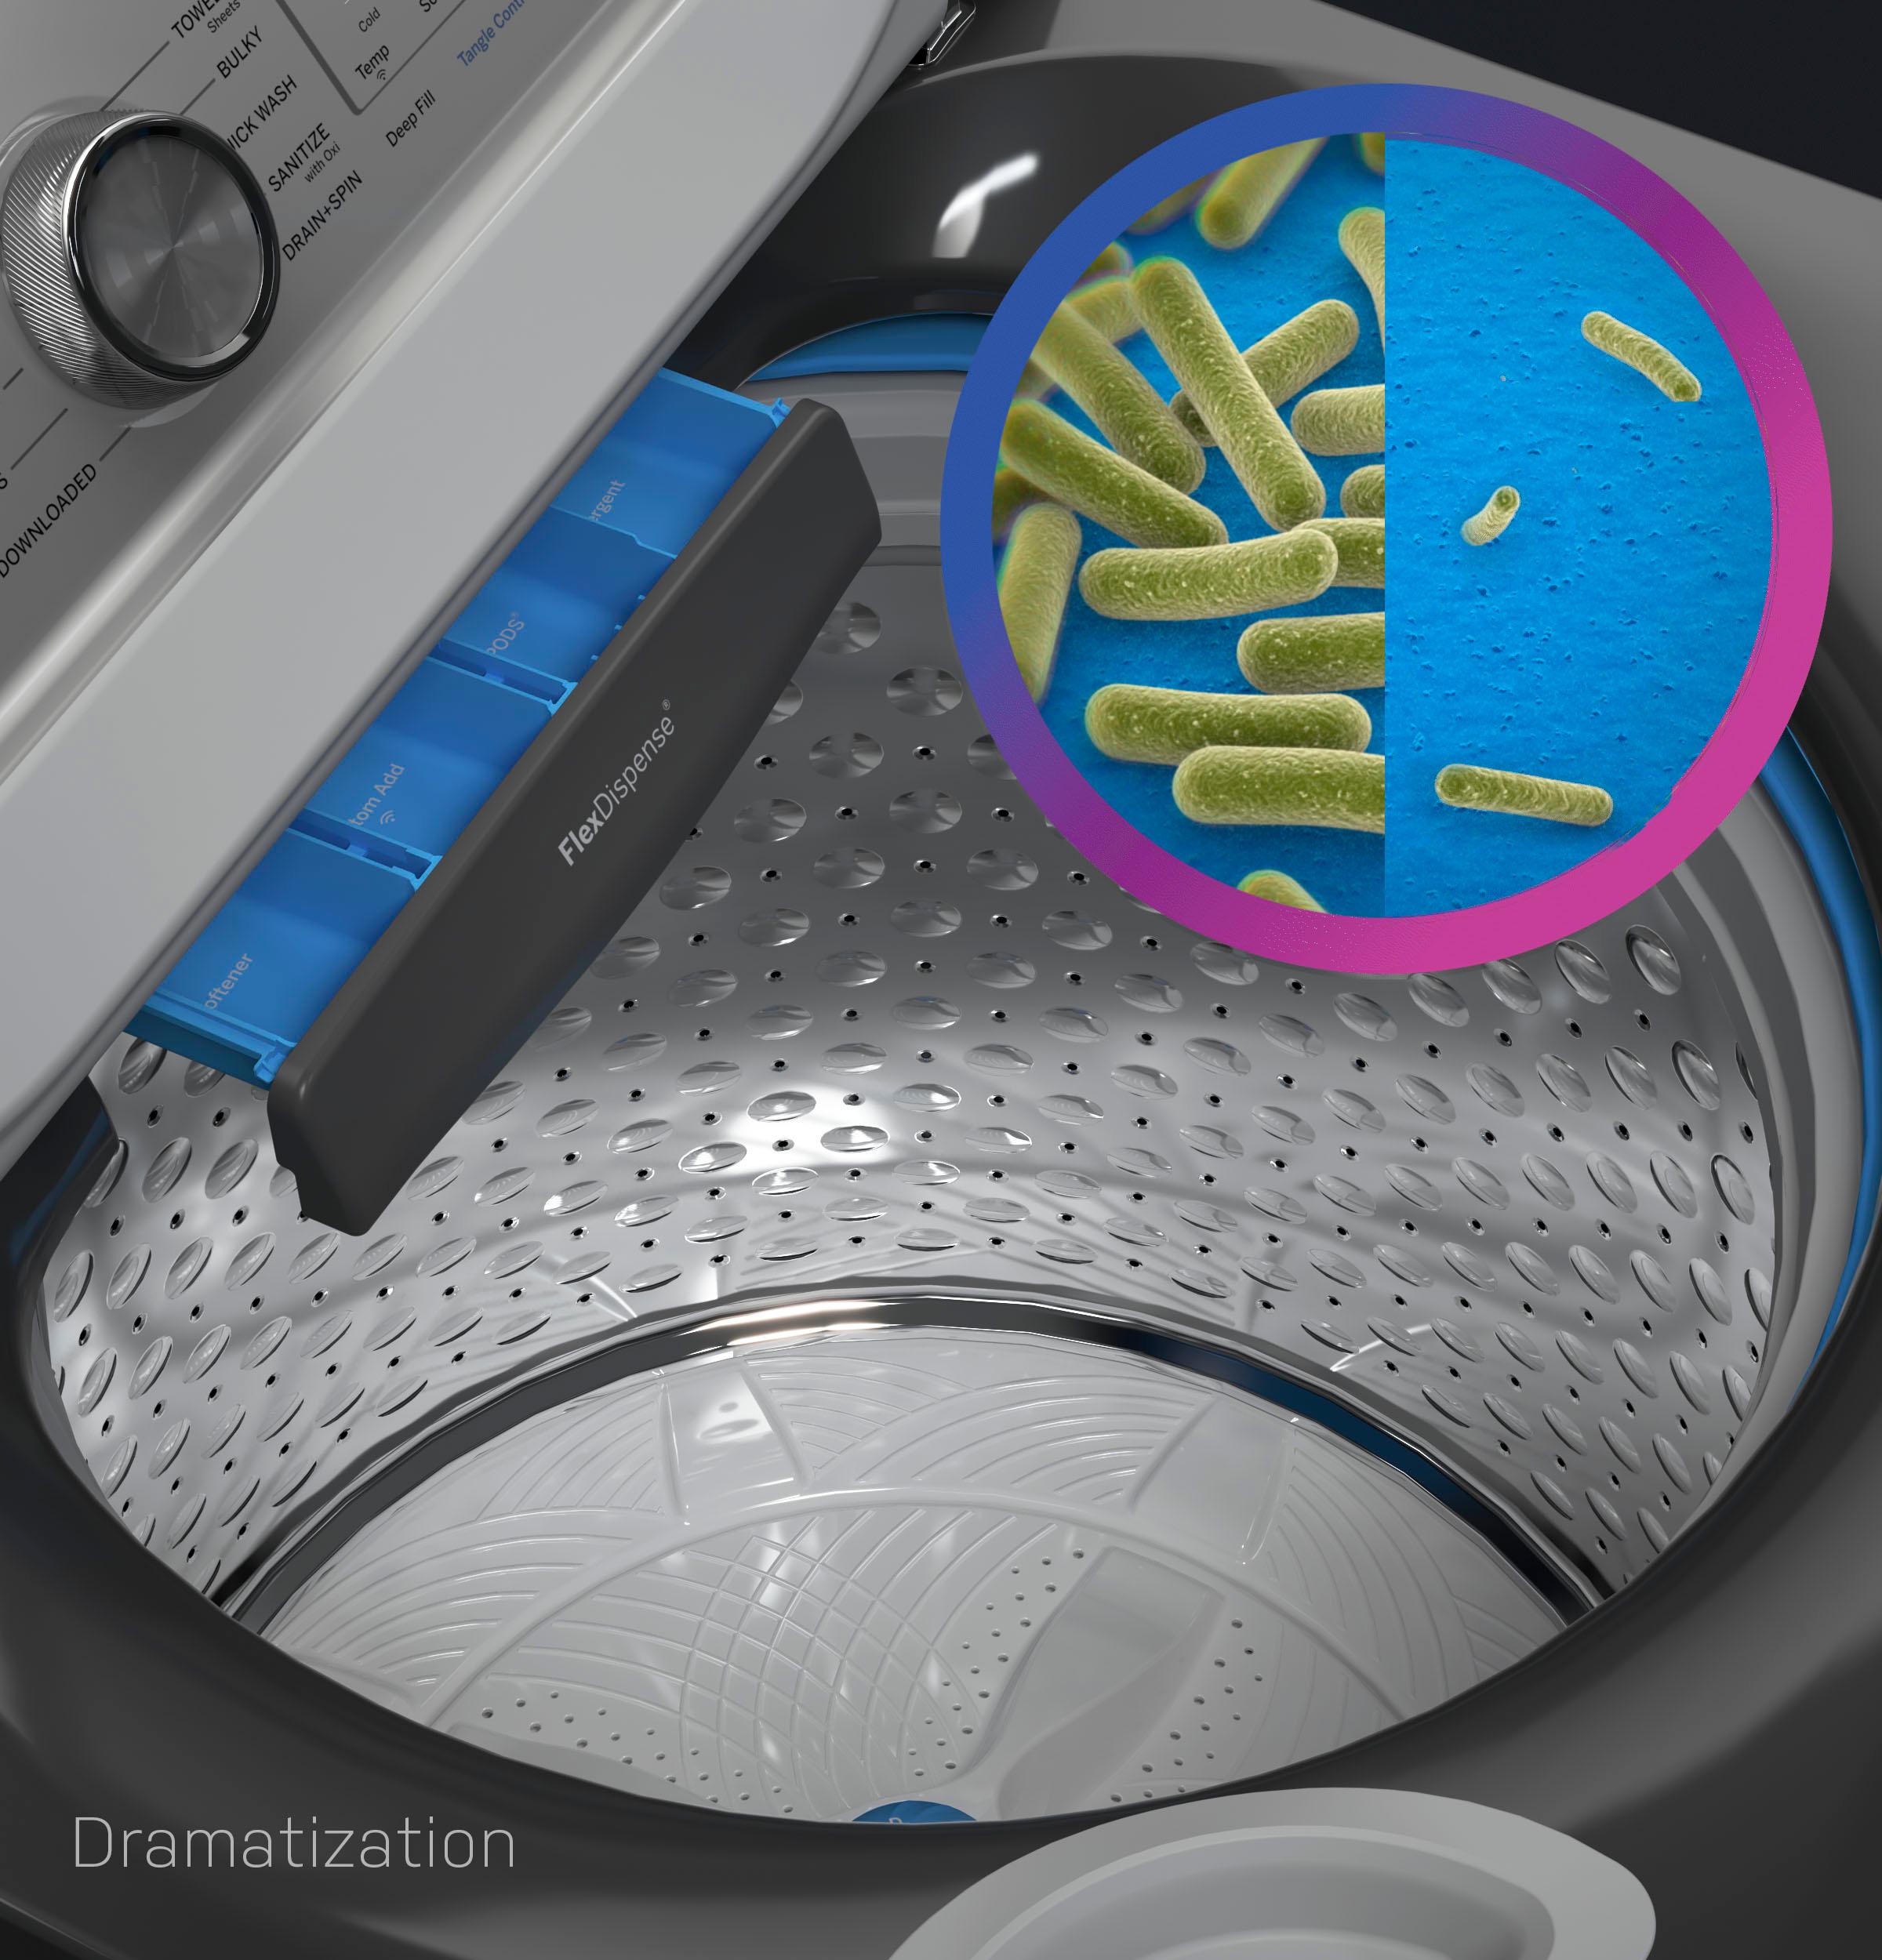 GE Profile™ ENERGY STAR® 5.0 cu. ft. Capacity Washer with Smarter Wash Technology and FlexDispense™